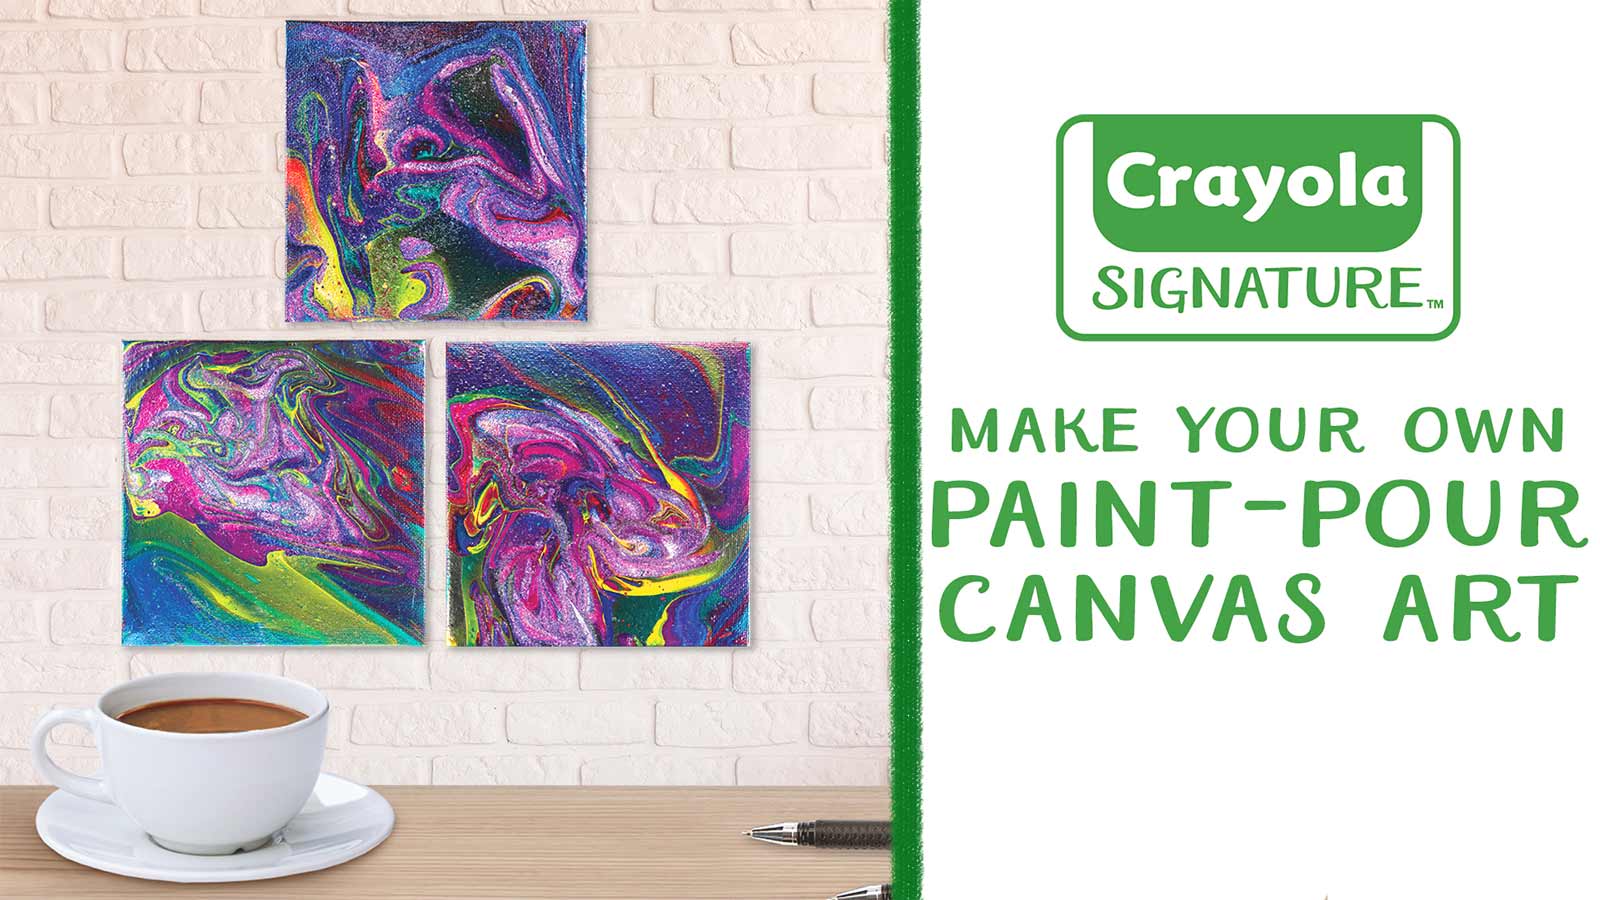 https://www.crayola.com/-/media/Crafts-New/Poster-Frames/1600x900/Signature-Paint-Pour-Canvas-Kit_Poster-Frame.jpg